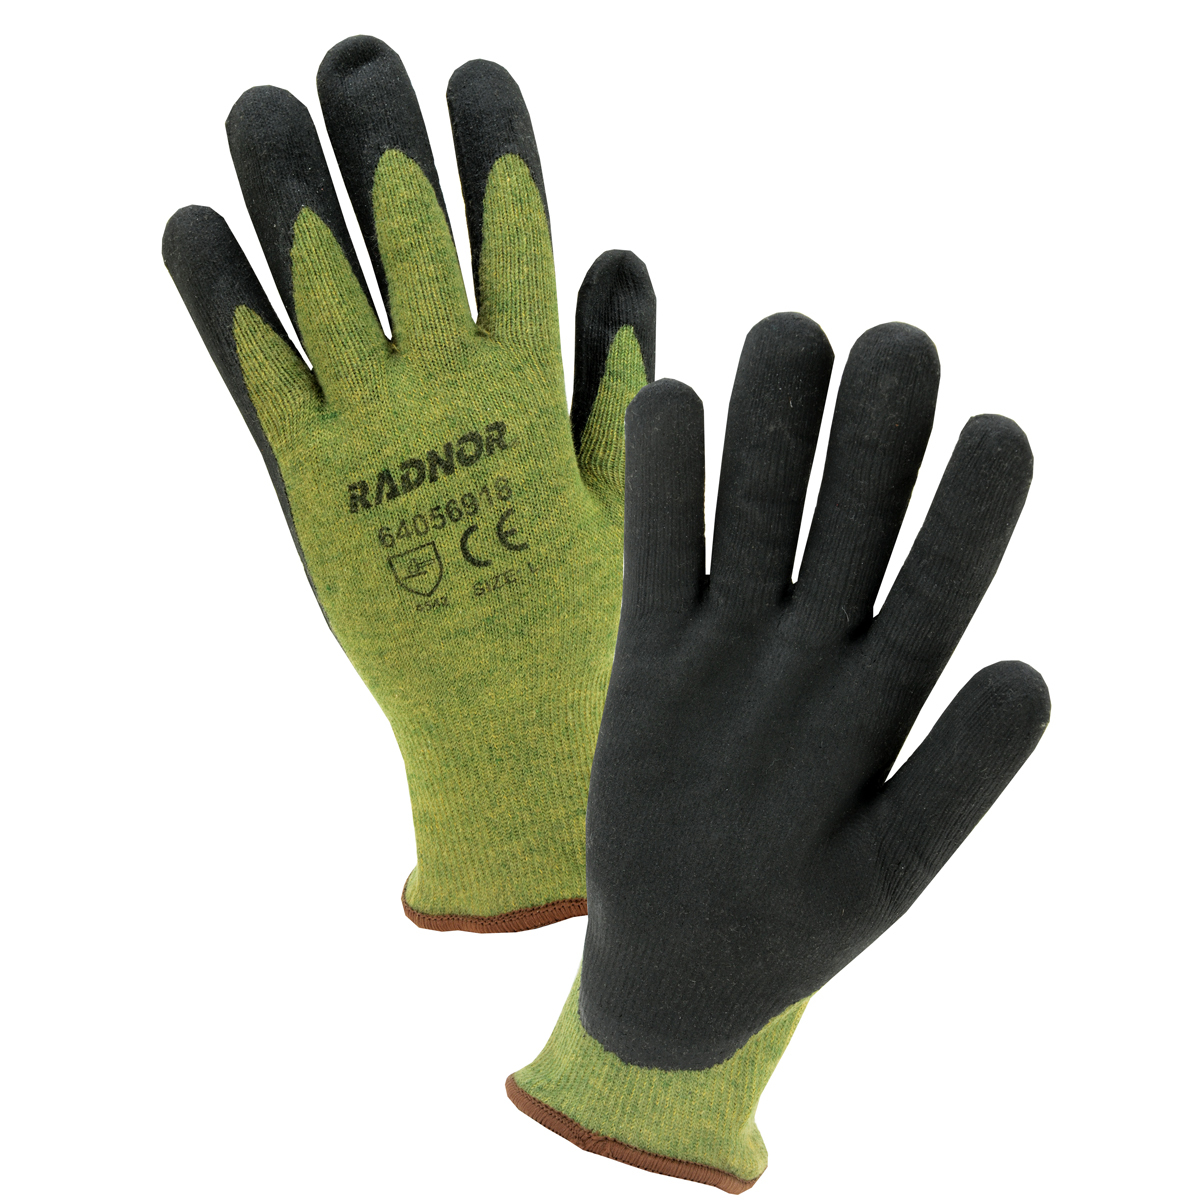 Radnor 64056918 Large 13 Gauge Kevlar Brand Fiber, Stainless Steel and Nitrile Palm Coated Cut Resistant Gloves with Knit Wrist, Stainless Steel Lined